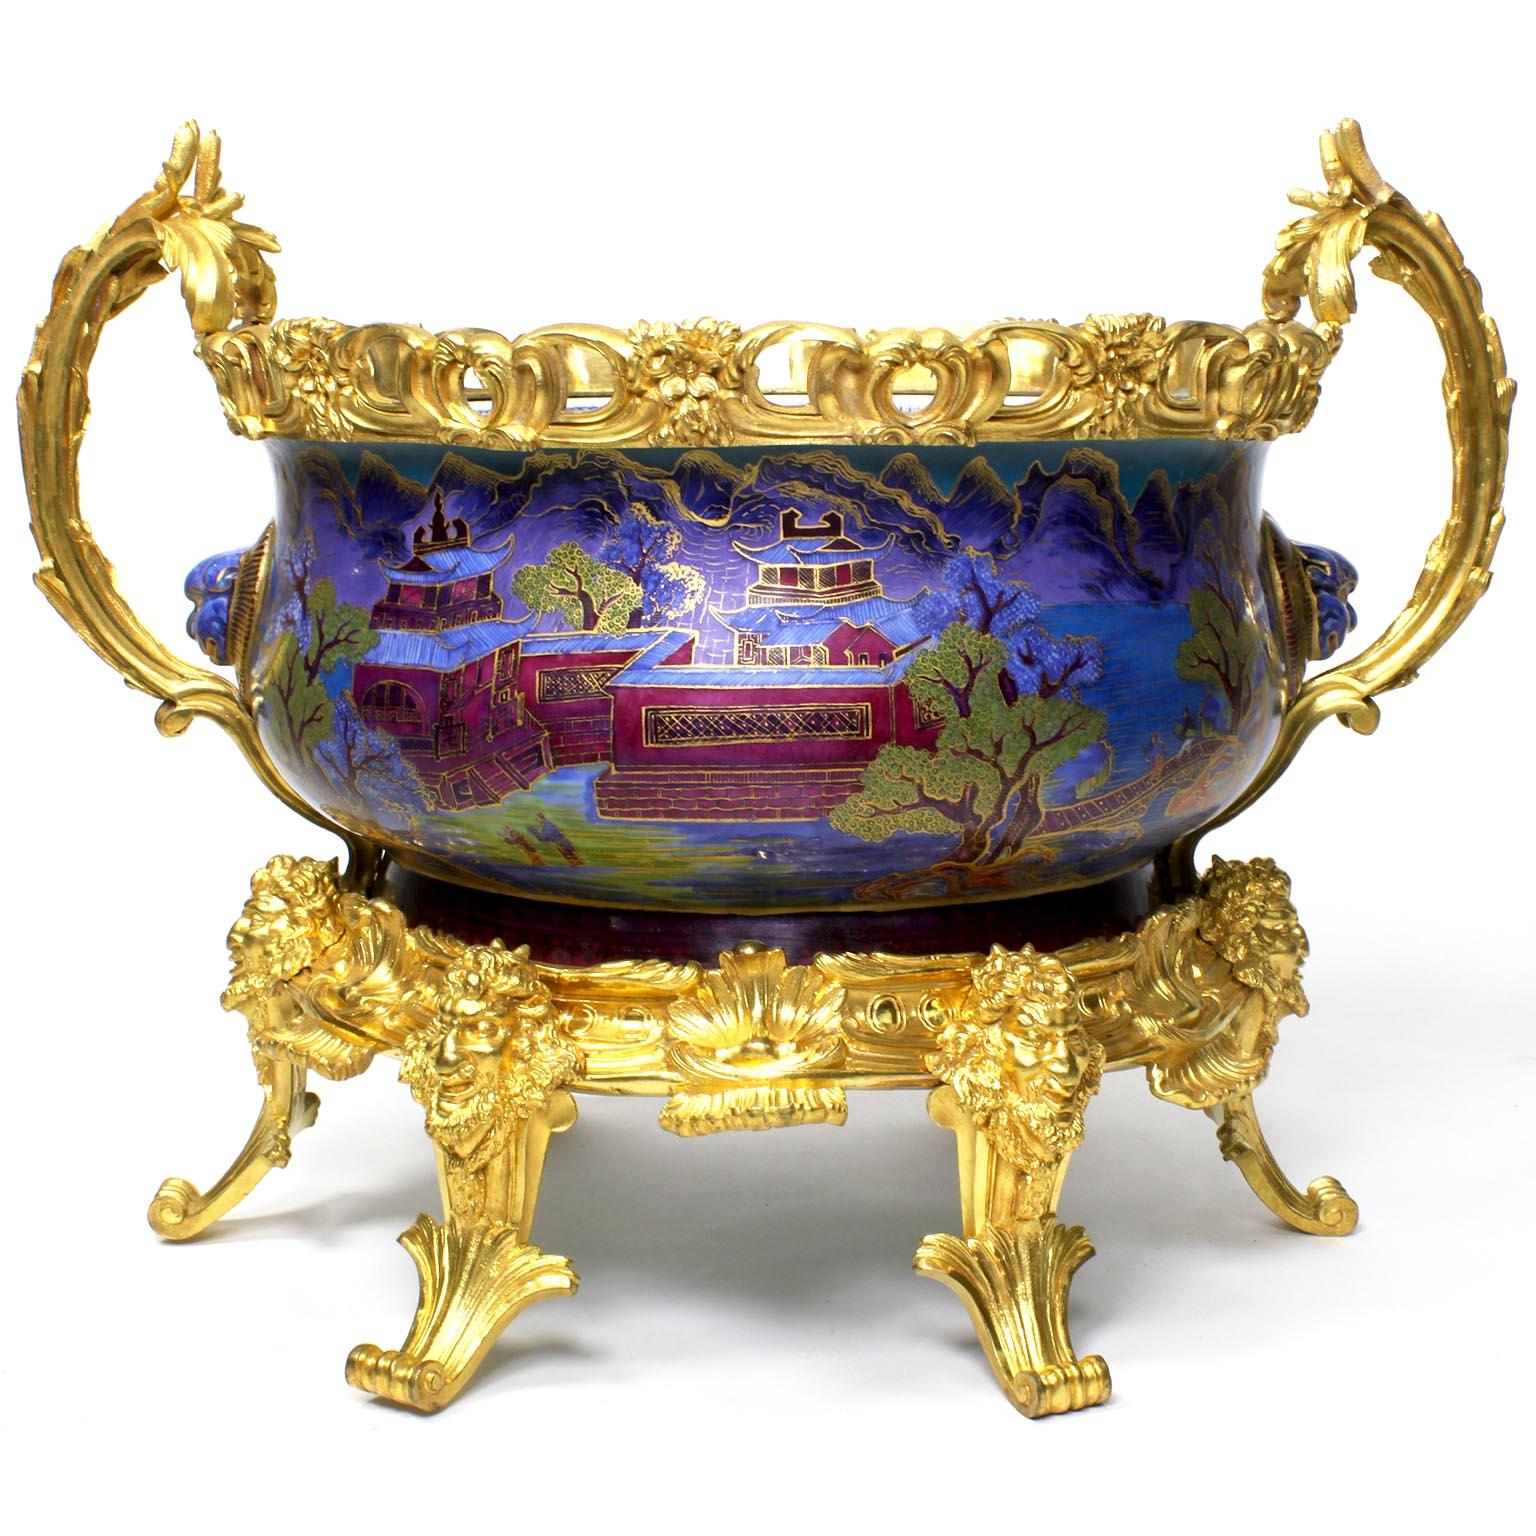 Gilt Chinese Export Famille Verte Porcelain & French Ormolu Chinoiserie Centerpiece For Sale